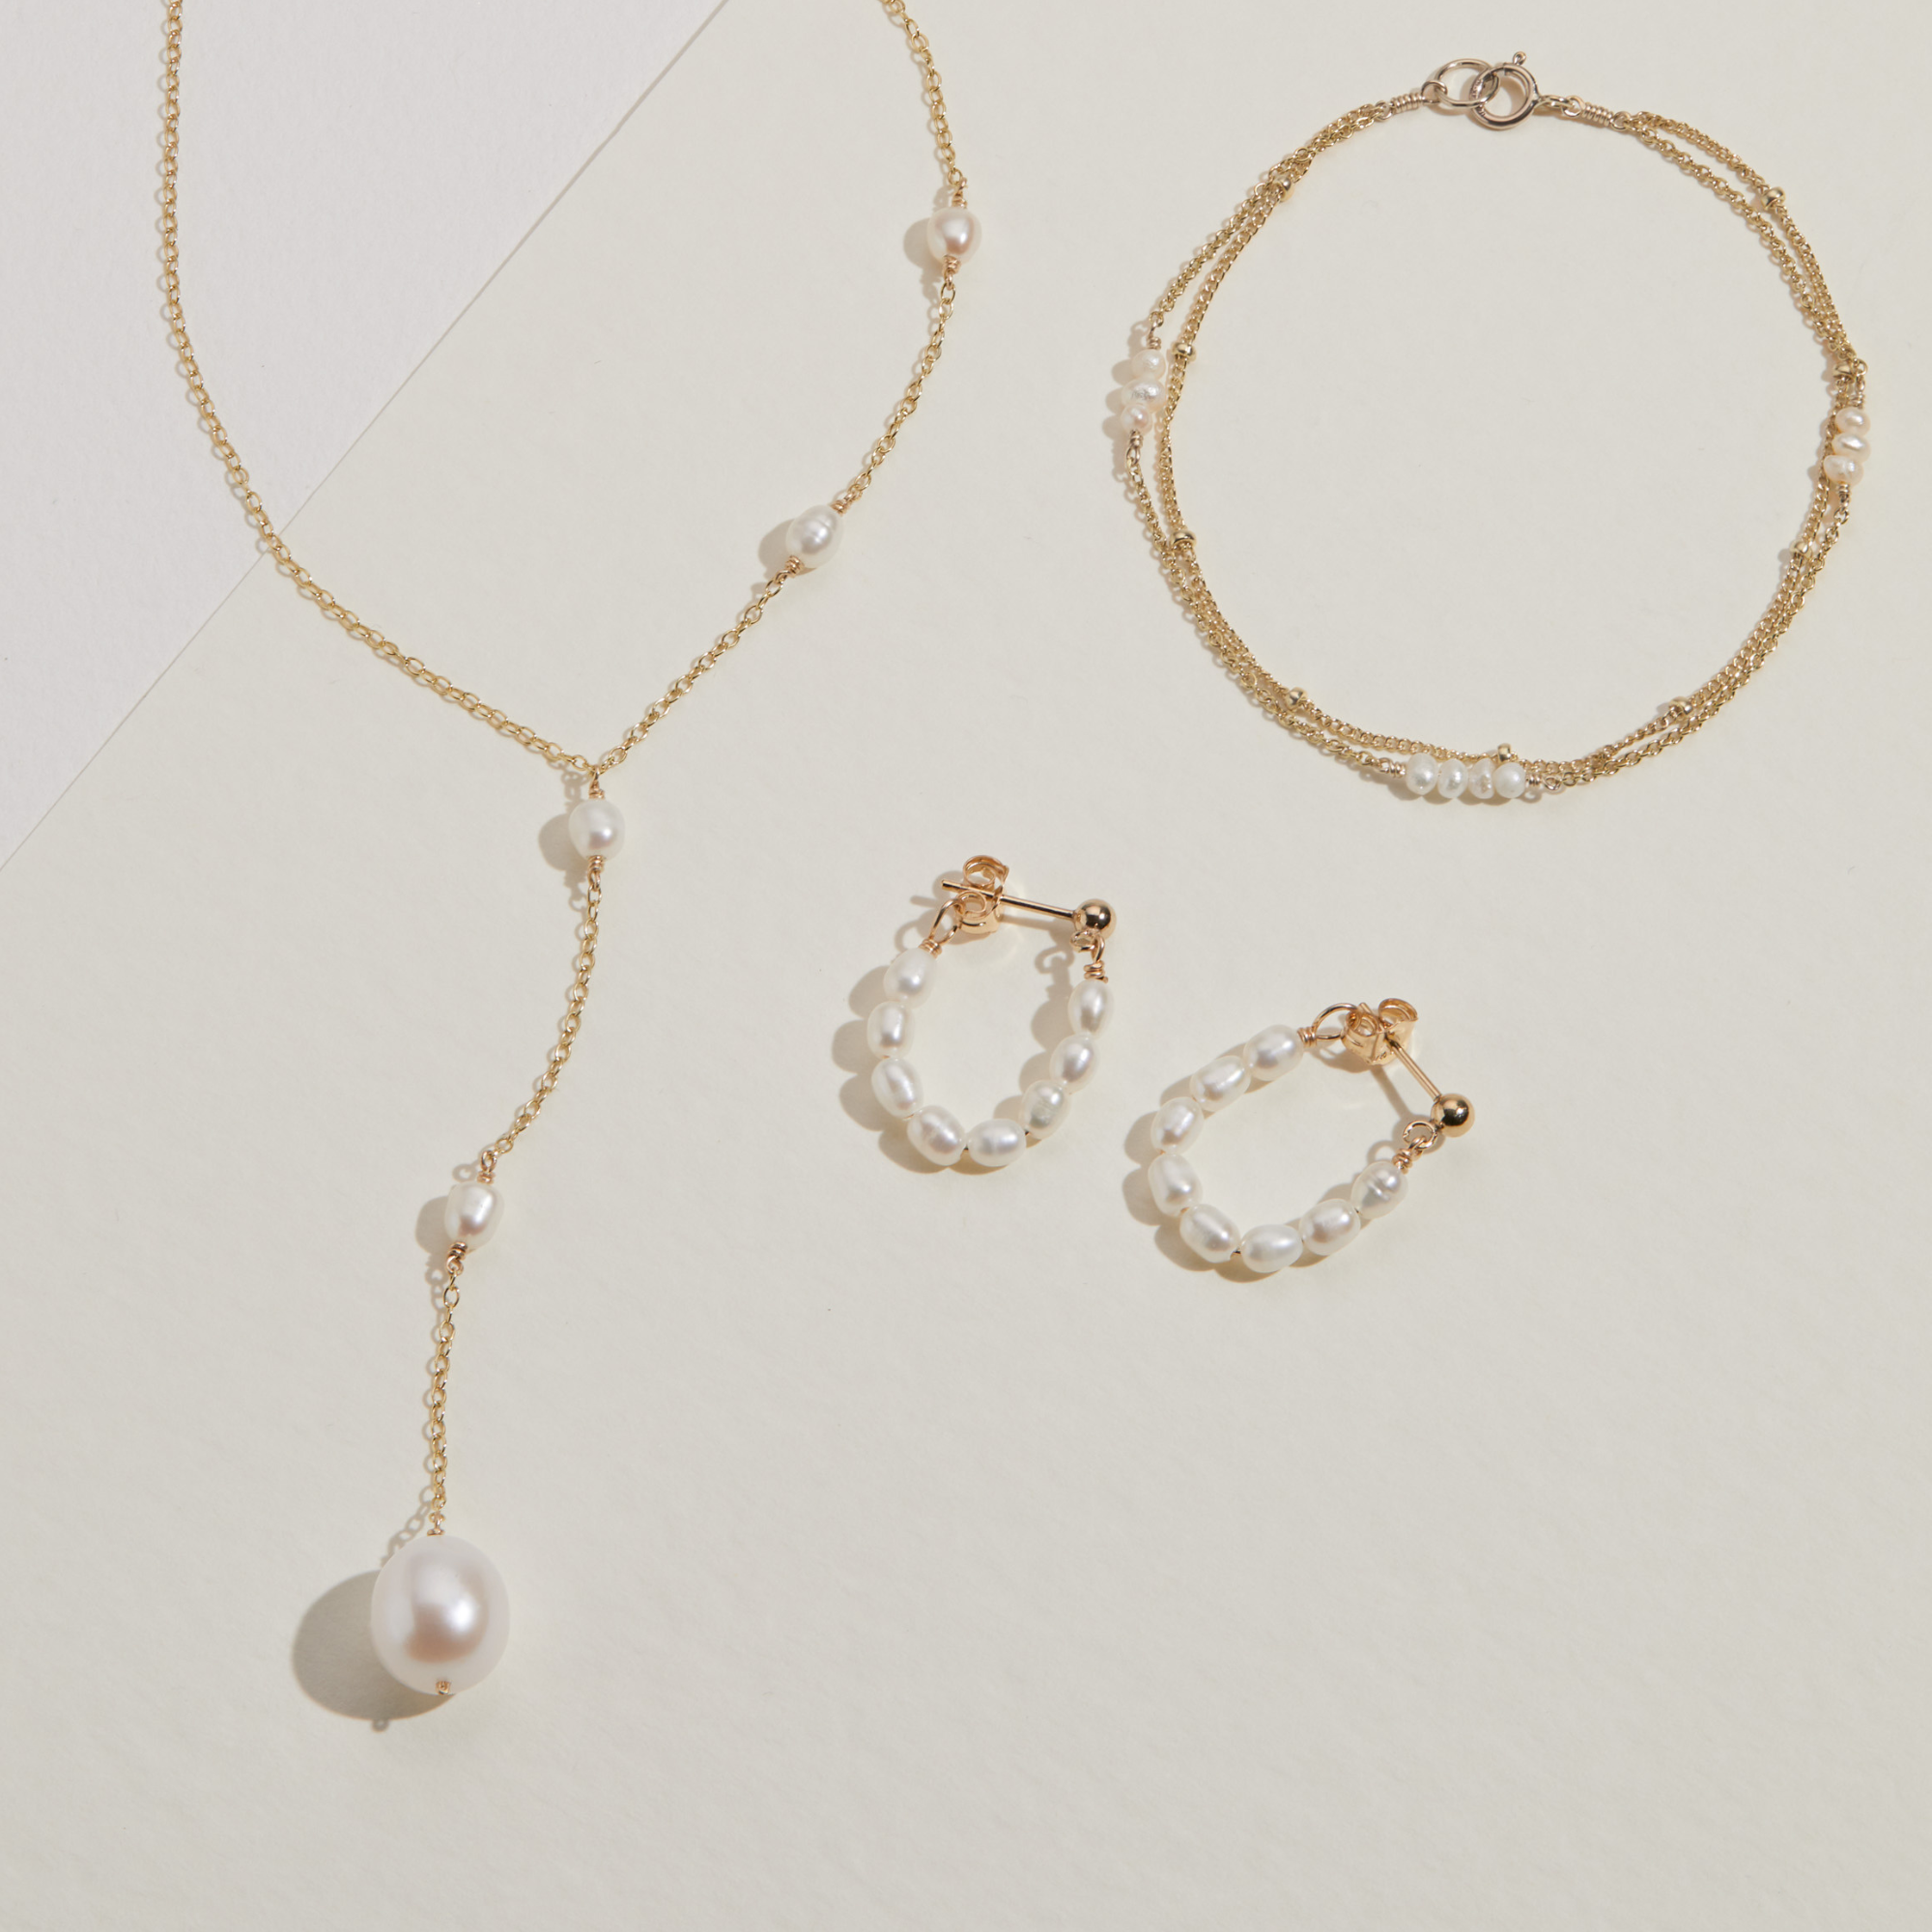 Gold seed pearl hoop earrings on a white surface with a gold seed pearl lariat necklace and bracelet displayed to wear together 